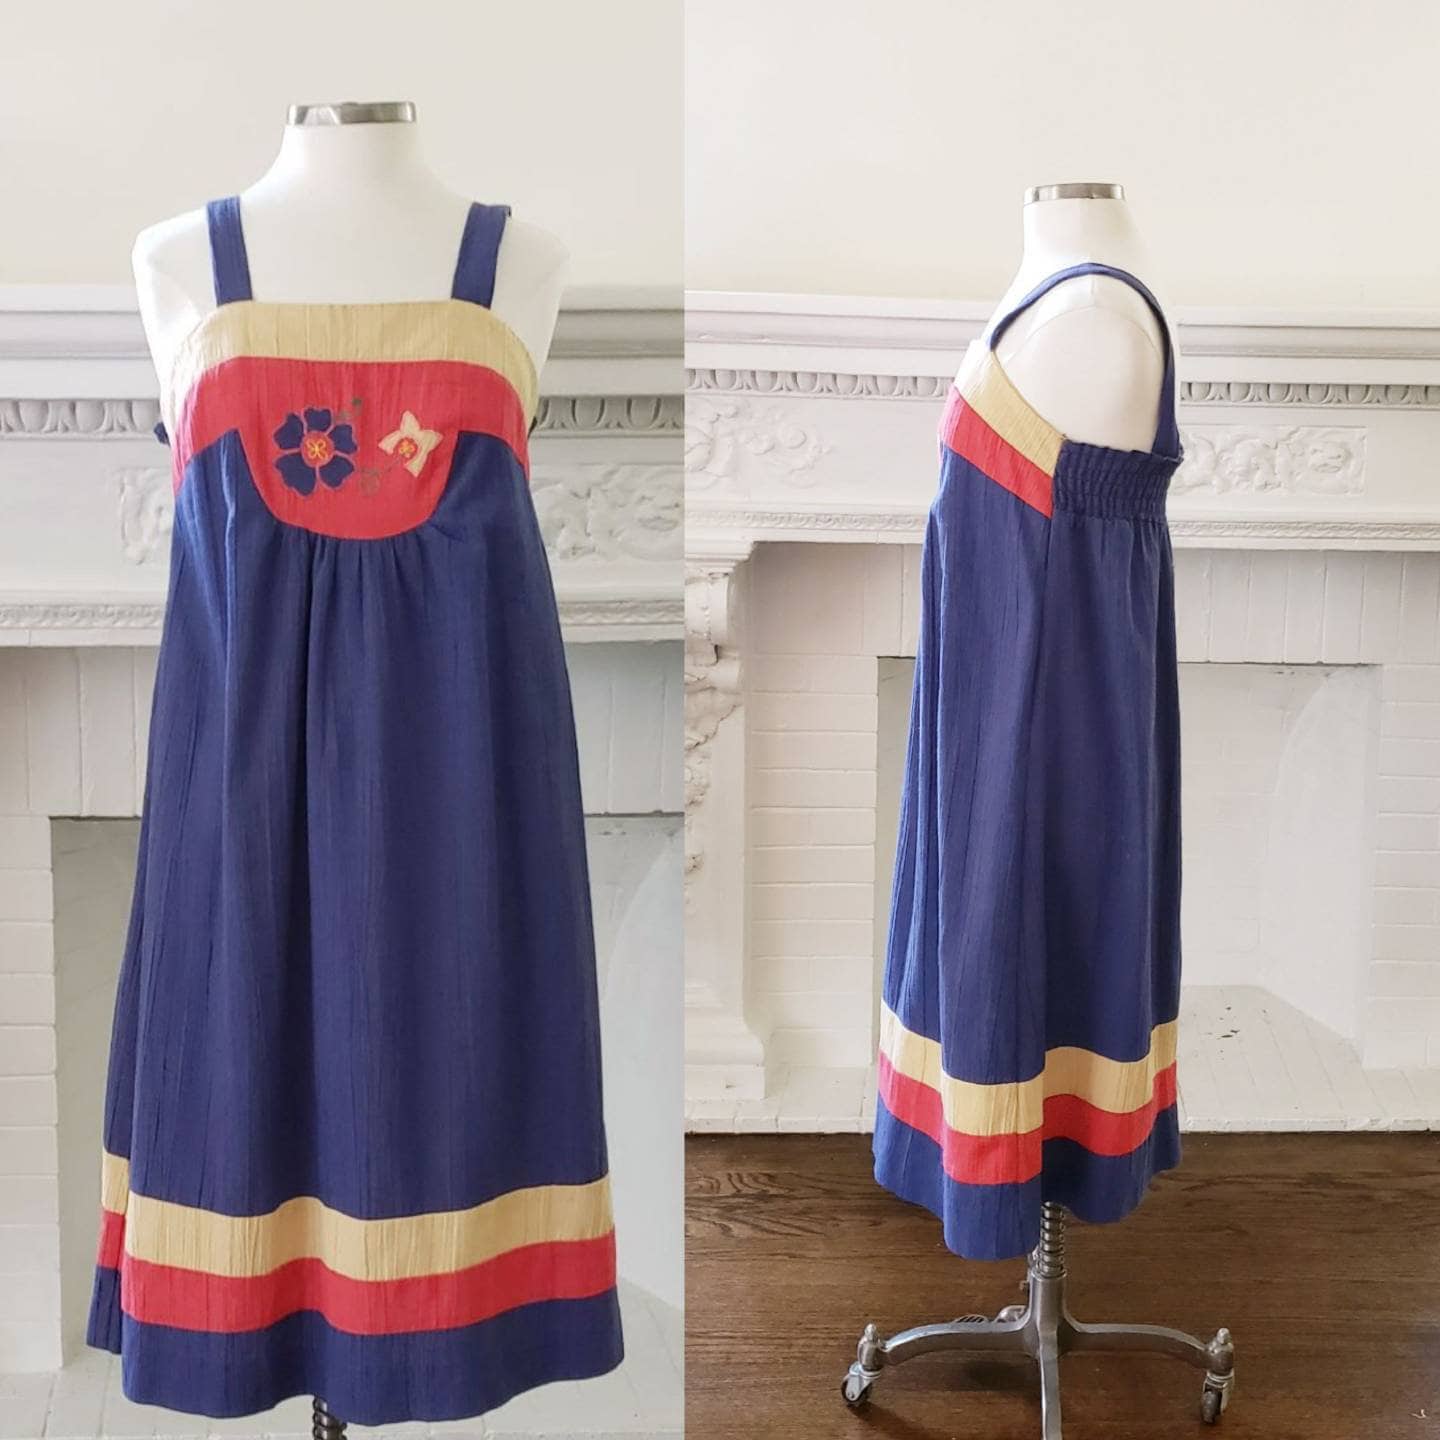 1970s Hippie Sundress in Navy Blue w/ Floral Embroidery / 70s Sleeveless A Line Summer Dress Smock Style Cottagecore Prairie/ M / Byra